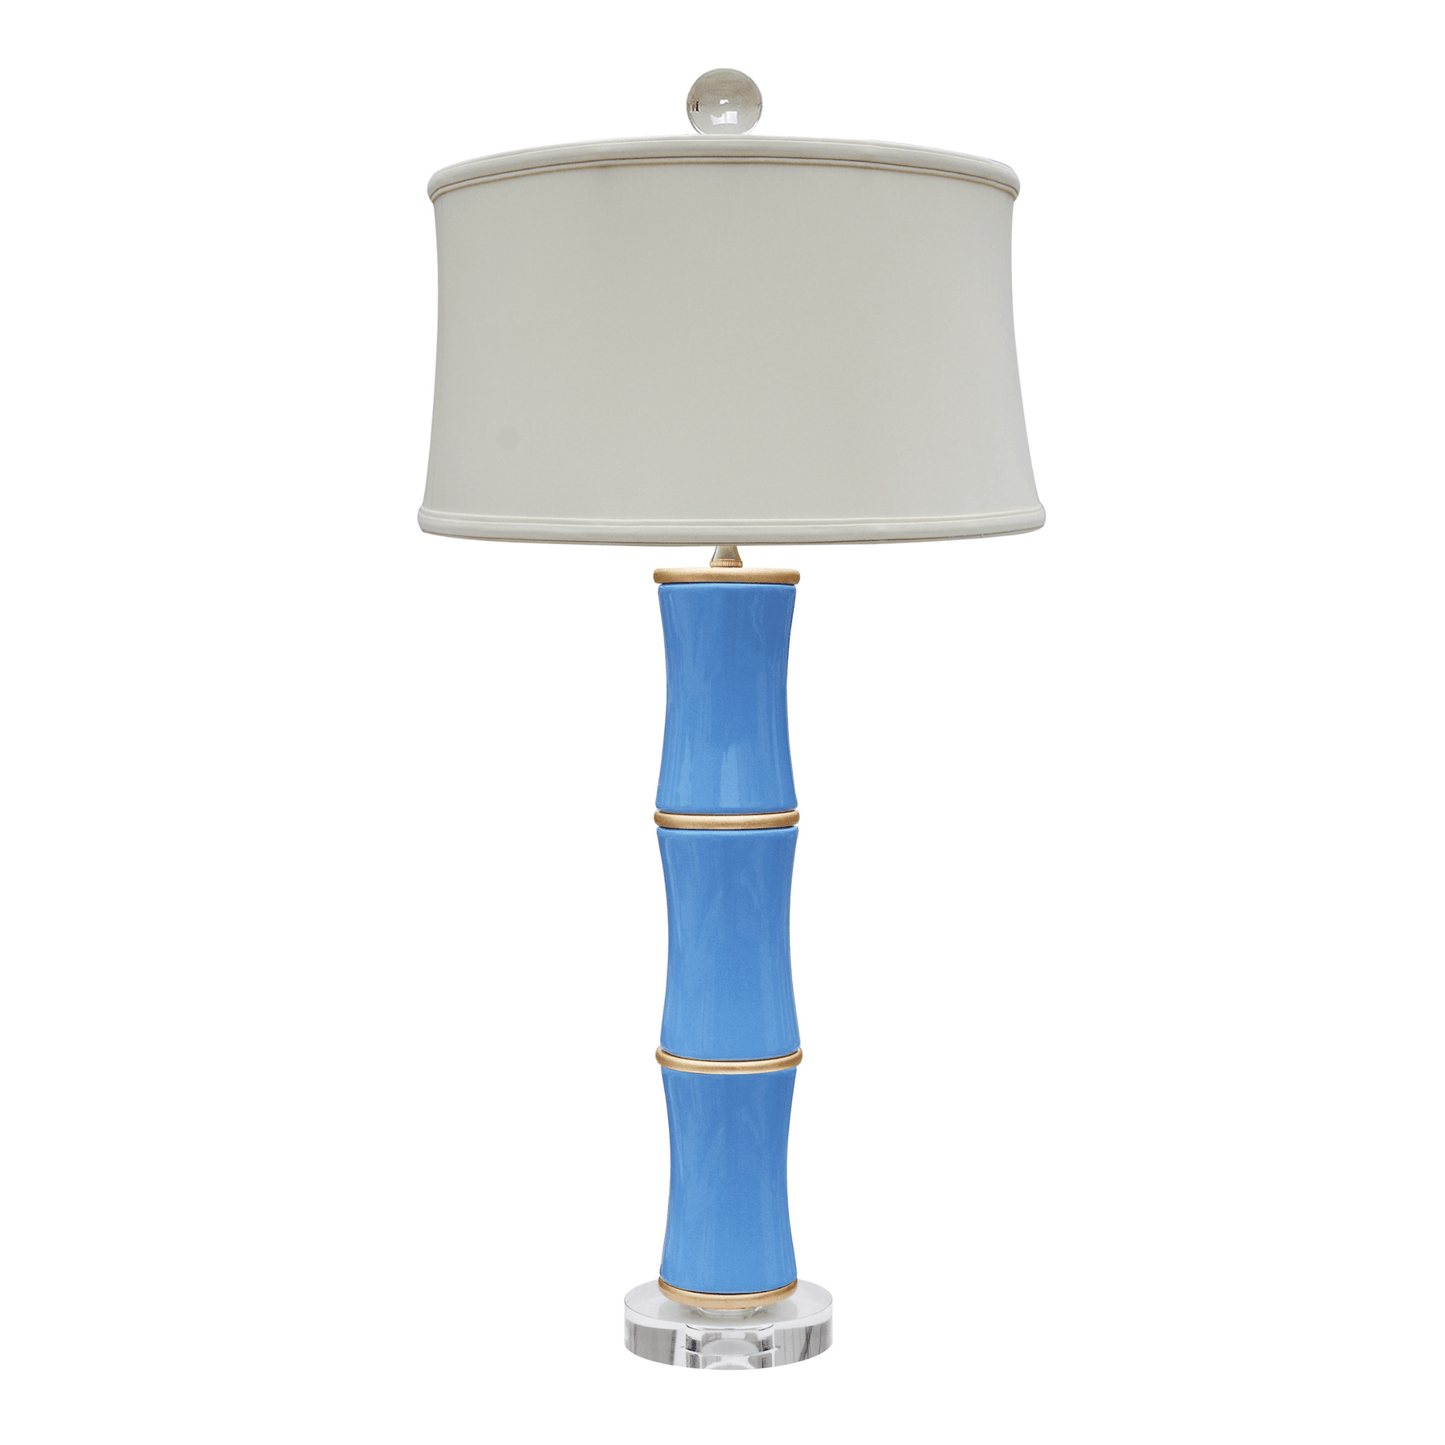 Beatrice Table Lamp - Fairley Fancy 